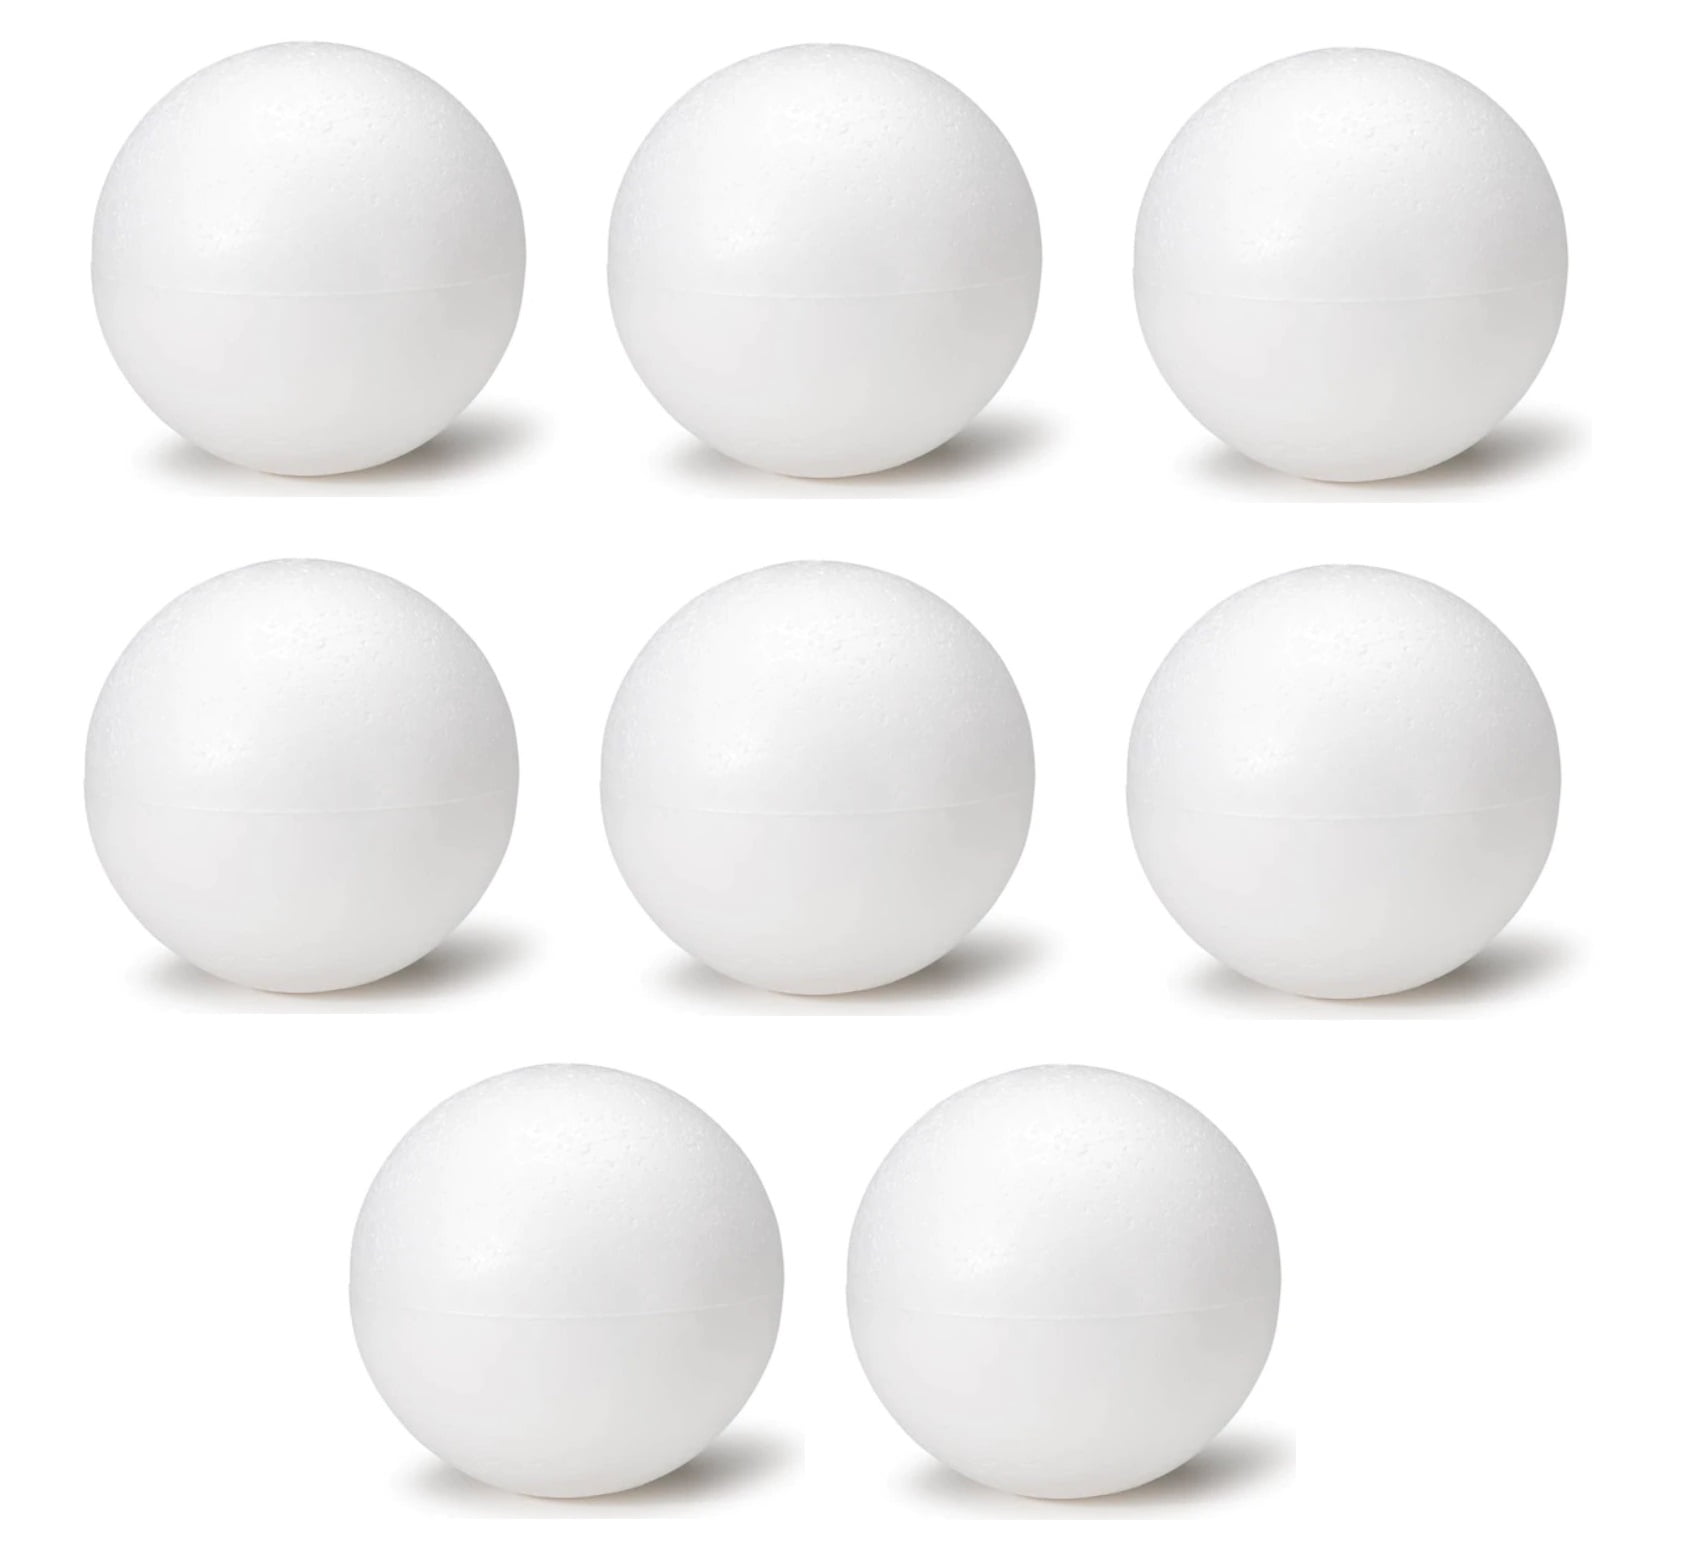 4 Inch Foam Ball Polystyrene Balls for Art & Crafts Projects 